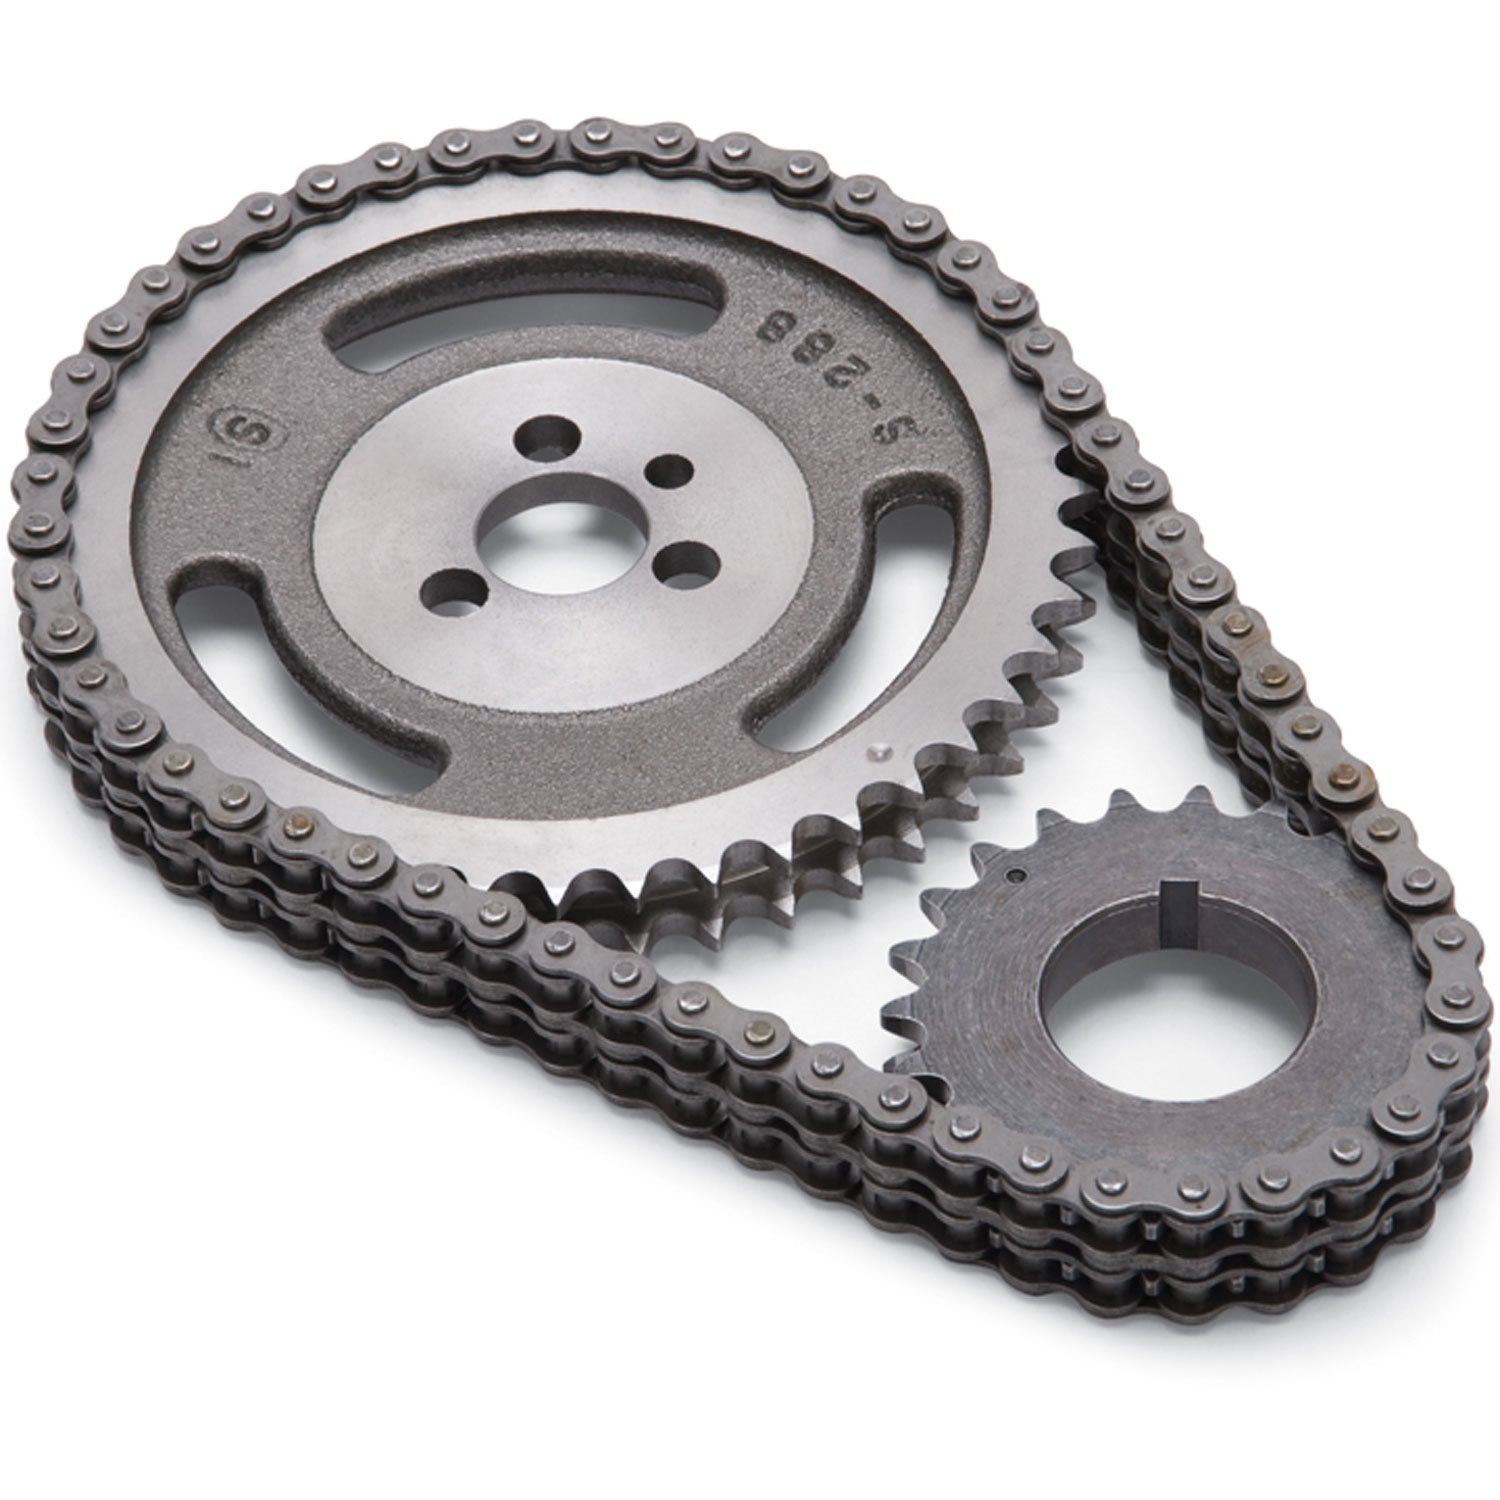 Stock Replacement Performer-Link Timing Chain Set for 1955-95